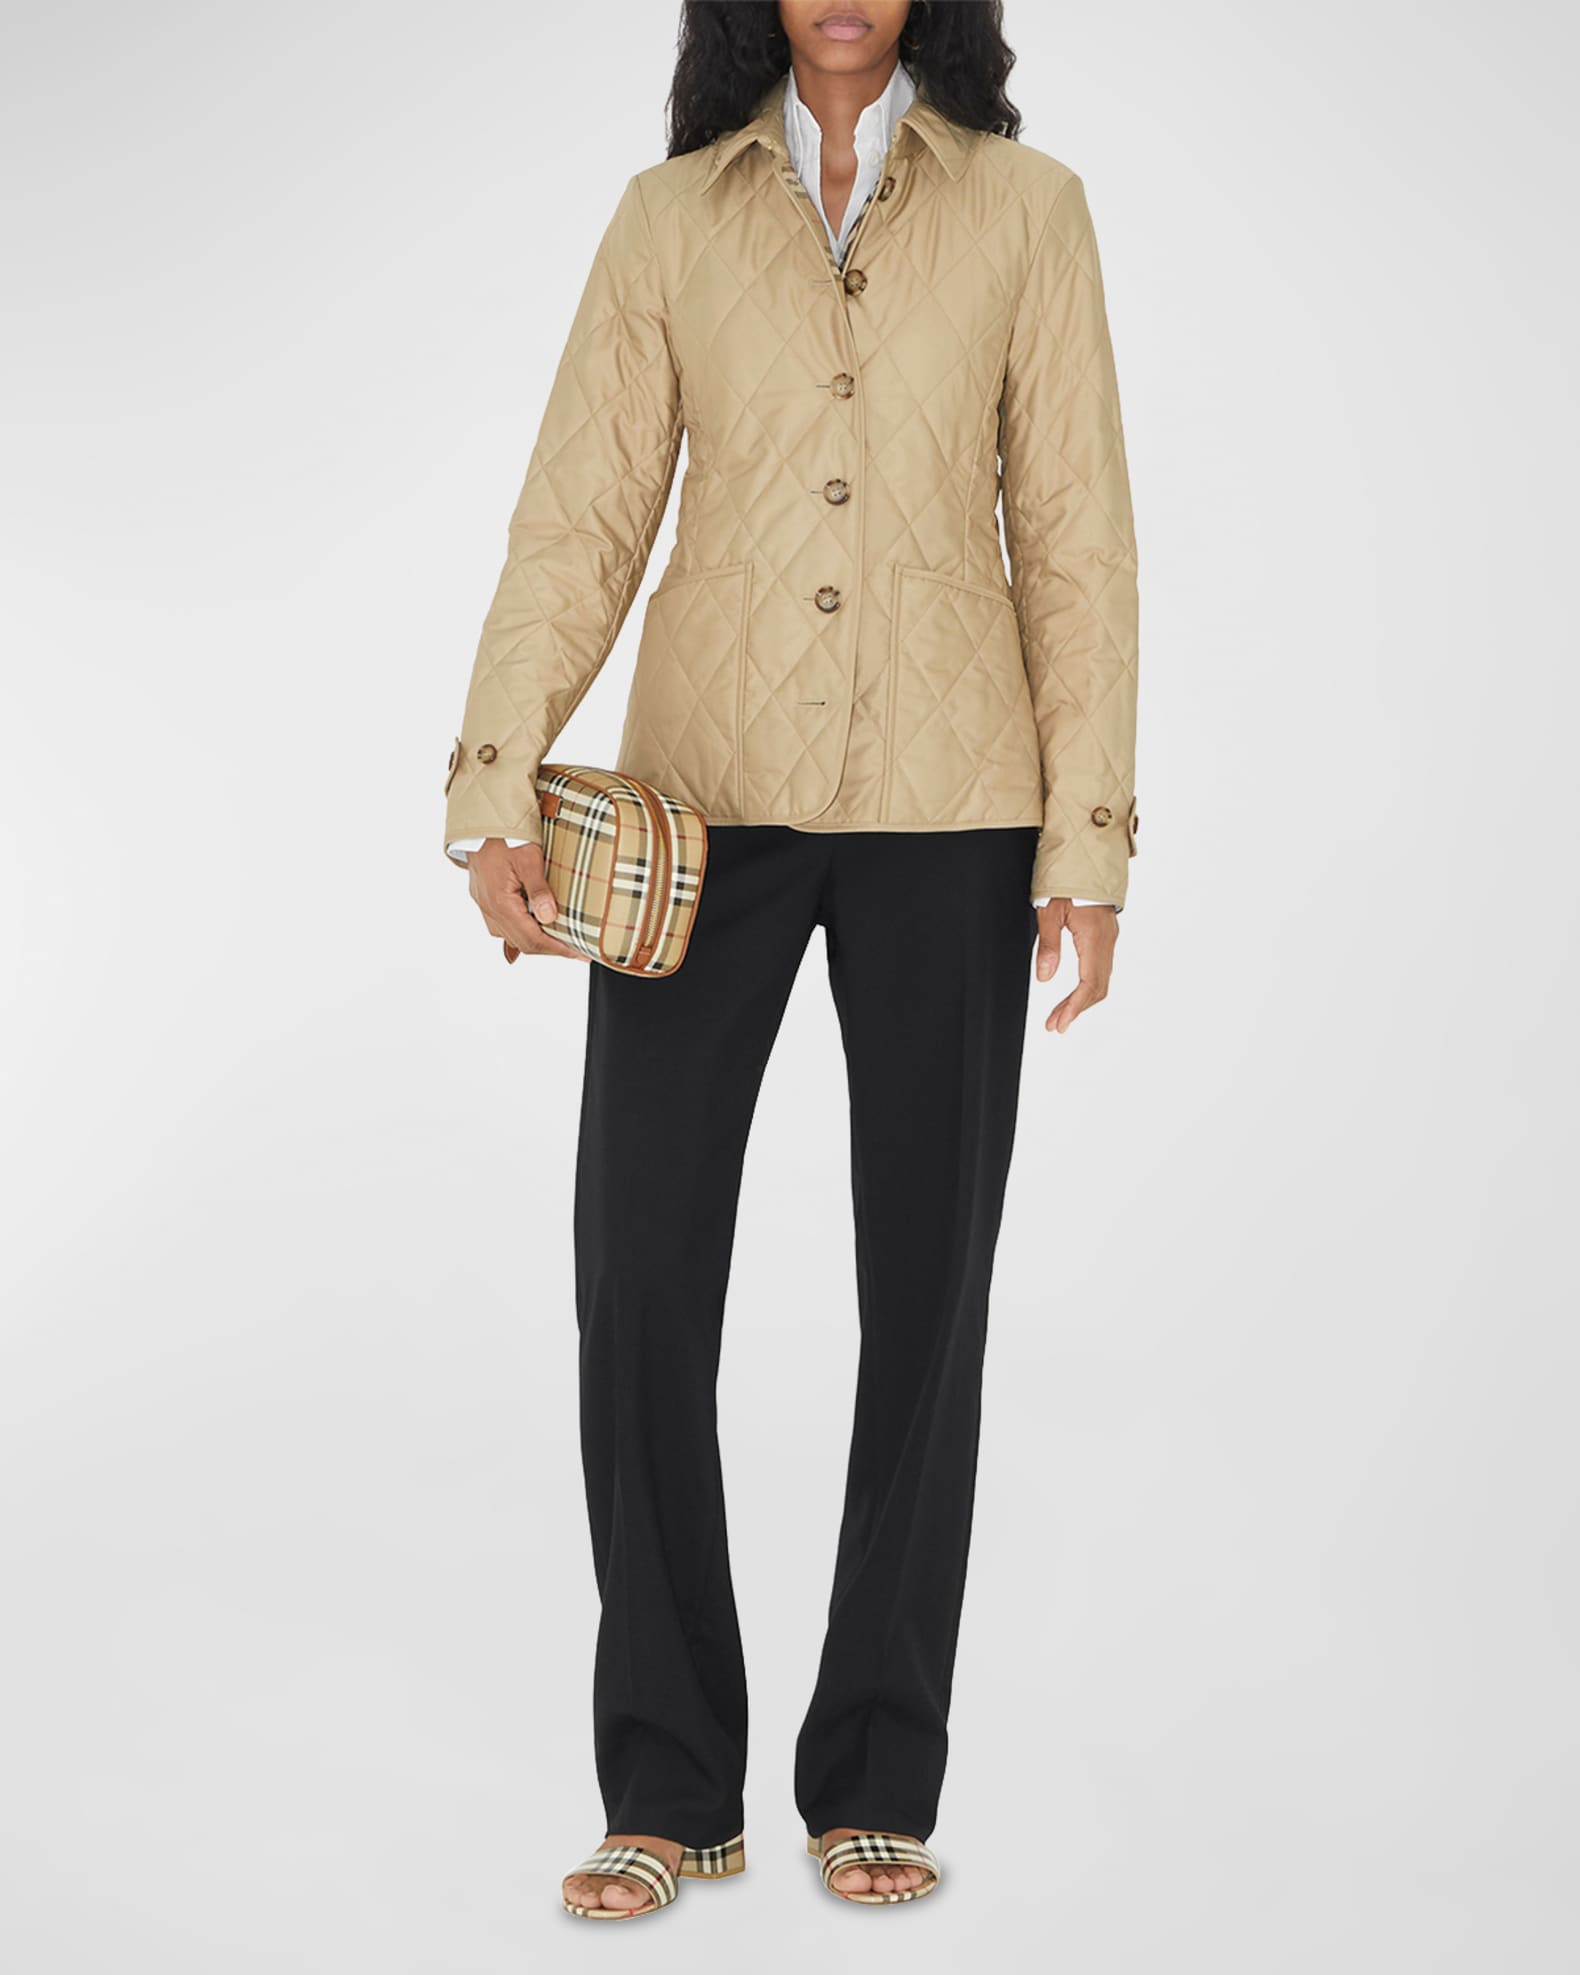 Burberry Fernleigh Diamond Quilted Jacket | Neiman Marcus